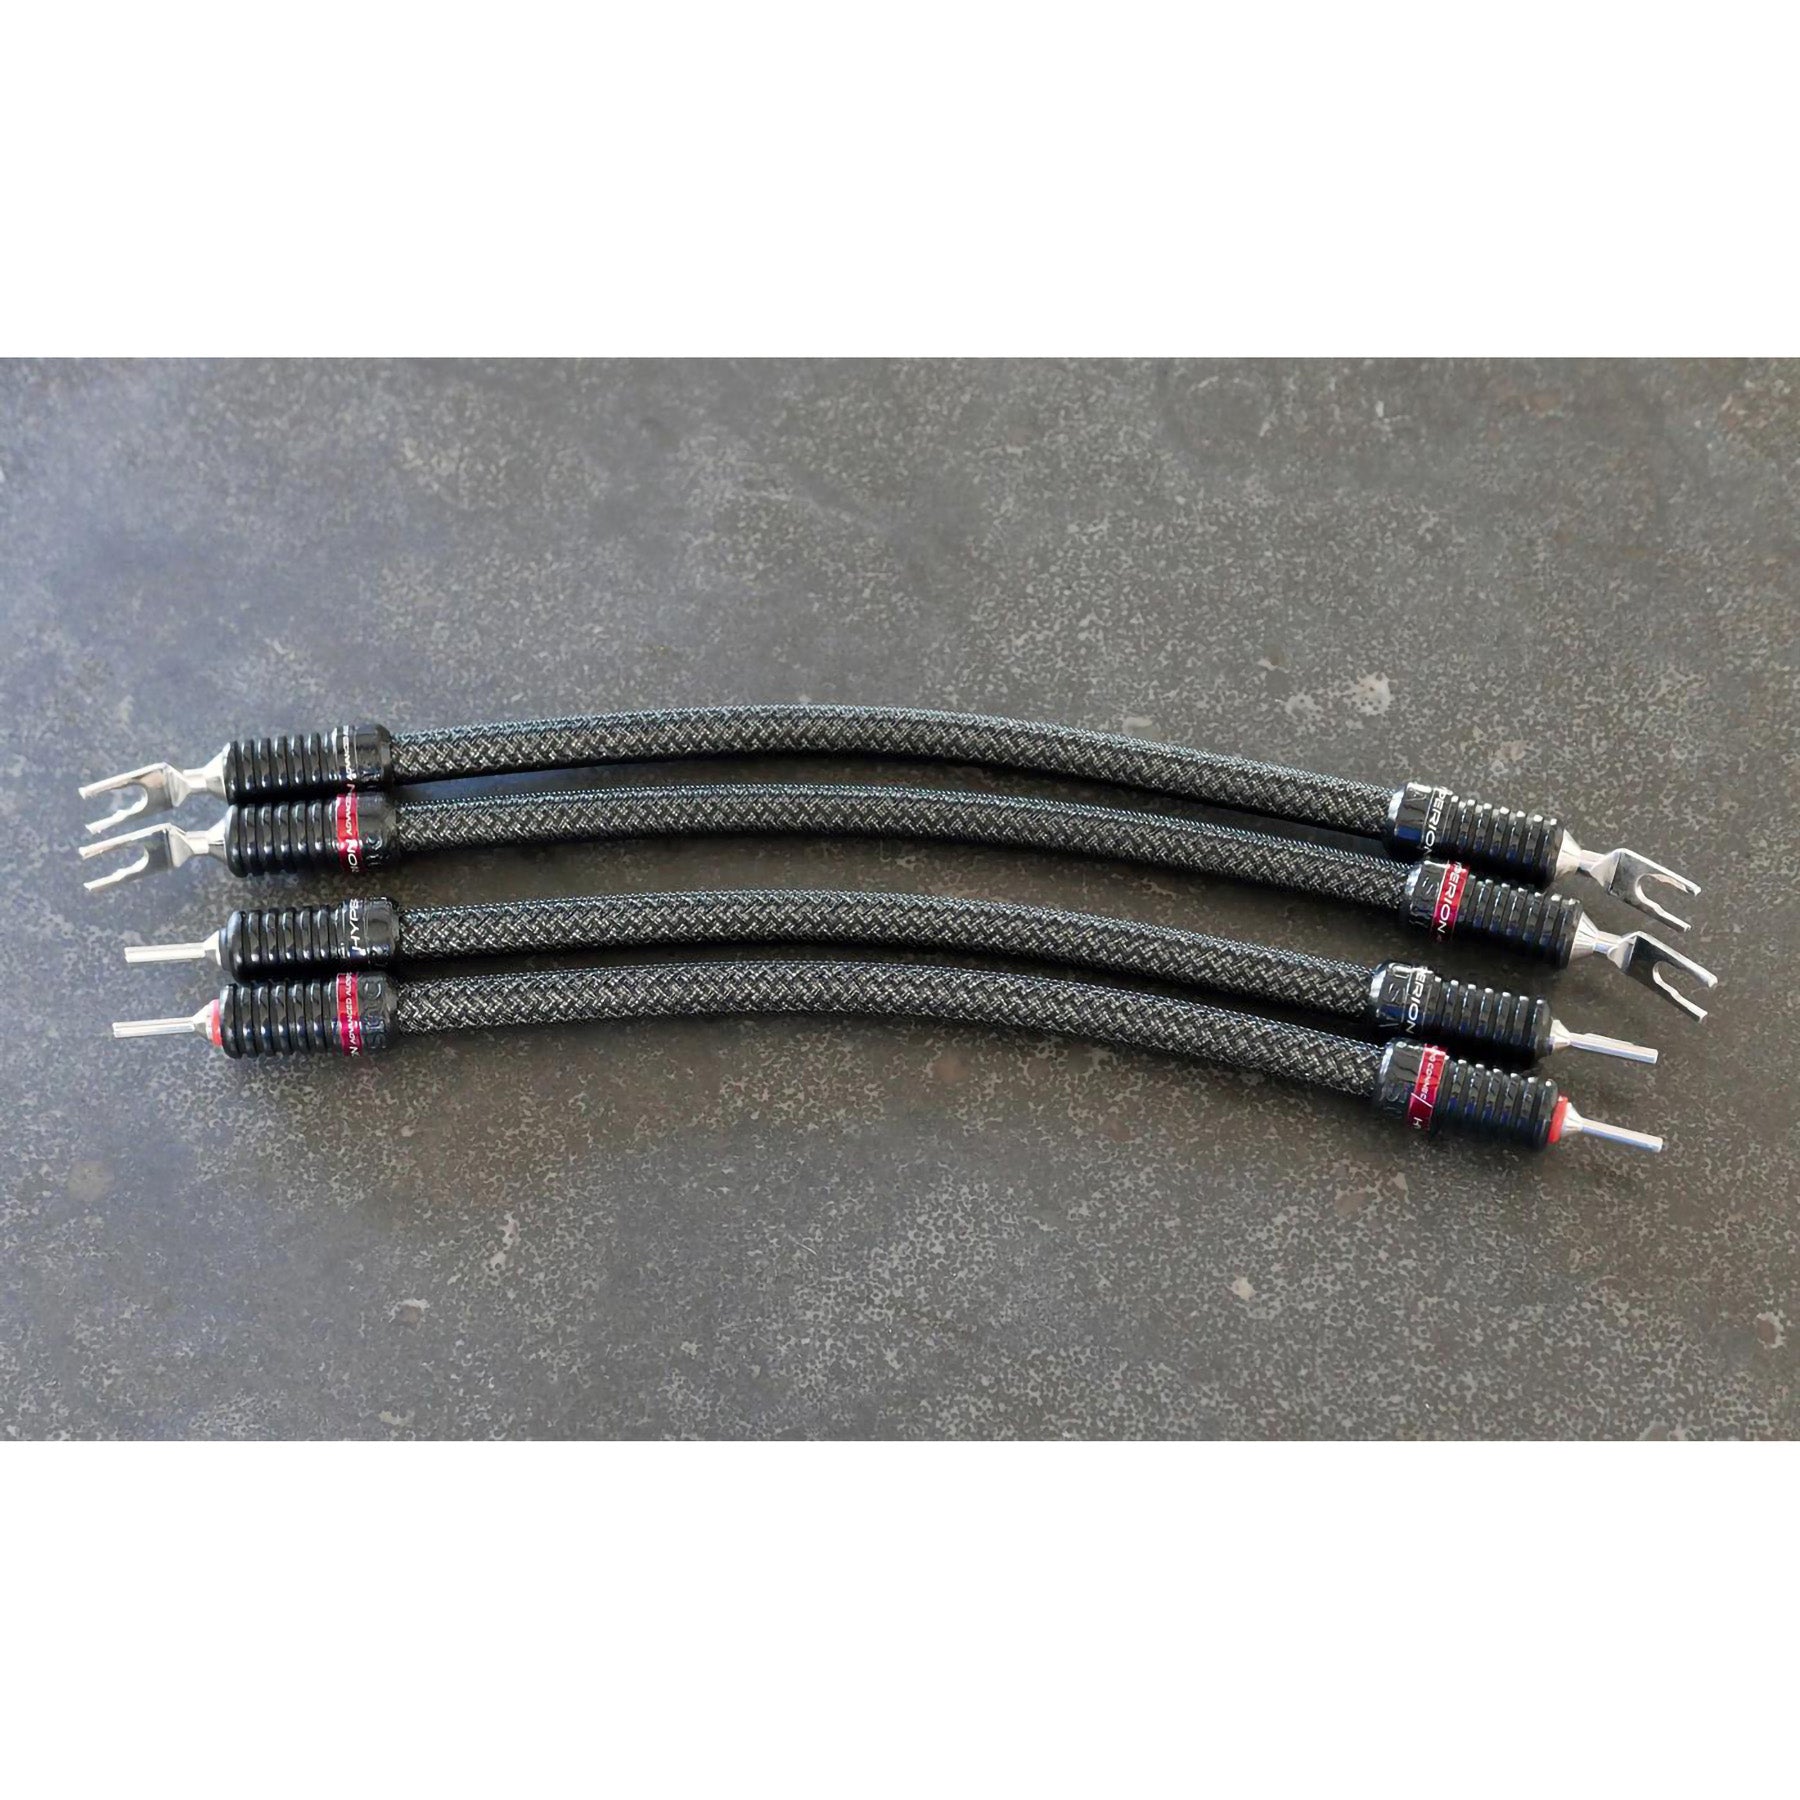 Stage III Concepts Cerberus Jumper Cable (set of 4)